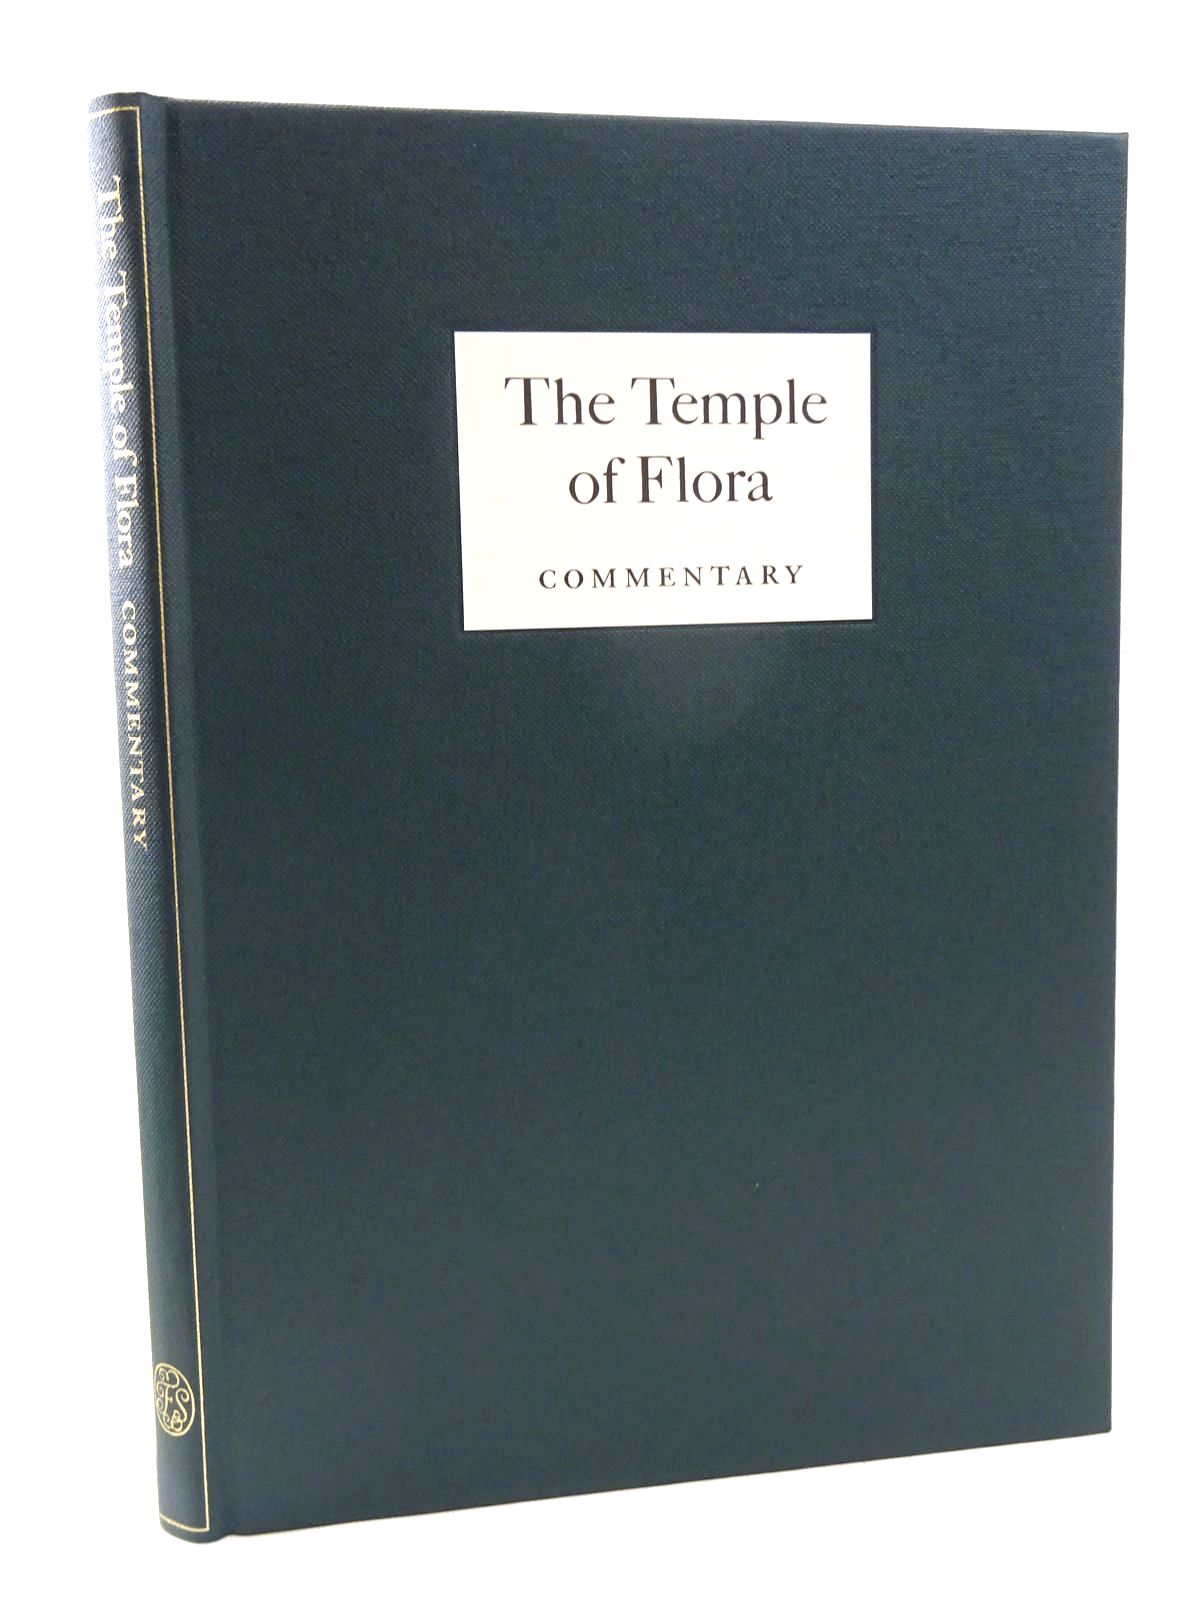 Photo of THE TEMPLE OF FLORA written by Harris, Stephen illustrated by Thornton, Robert published by Folio Society (STOCK CODE: 2125063)  for sale by Stella & Rose's Books